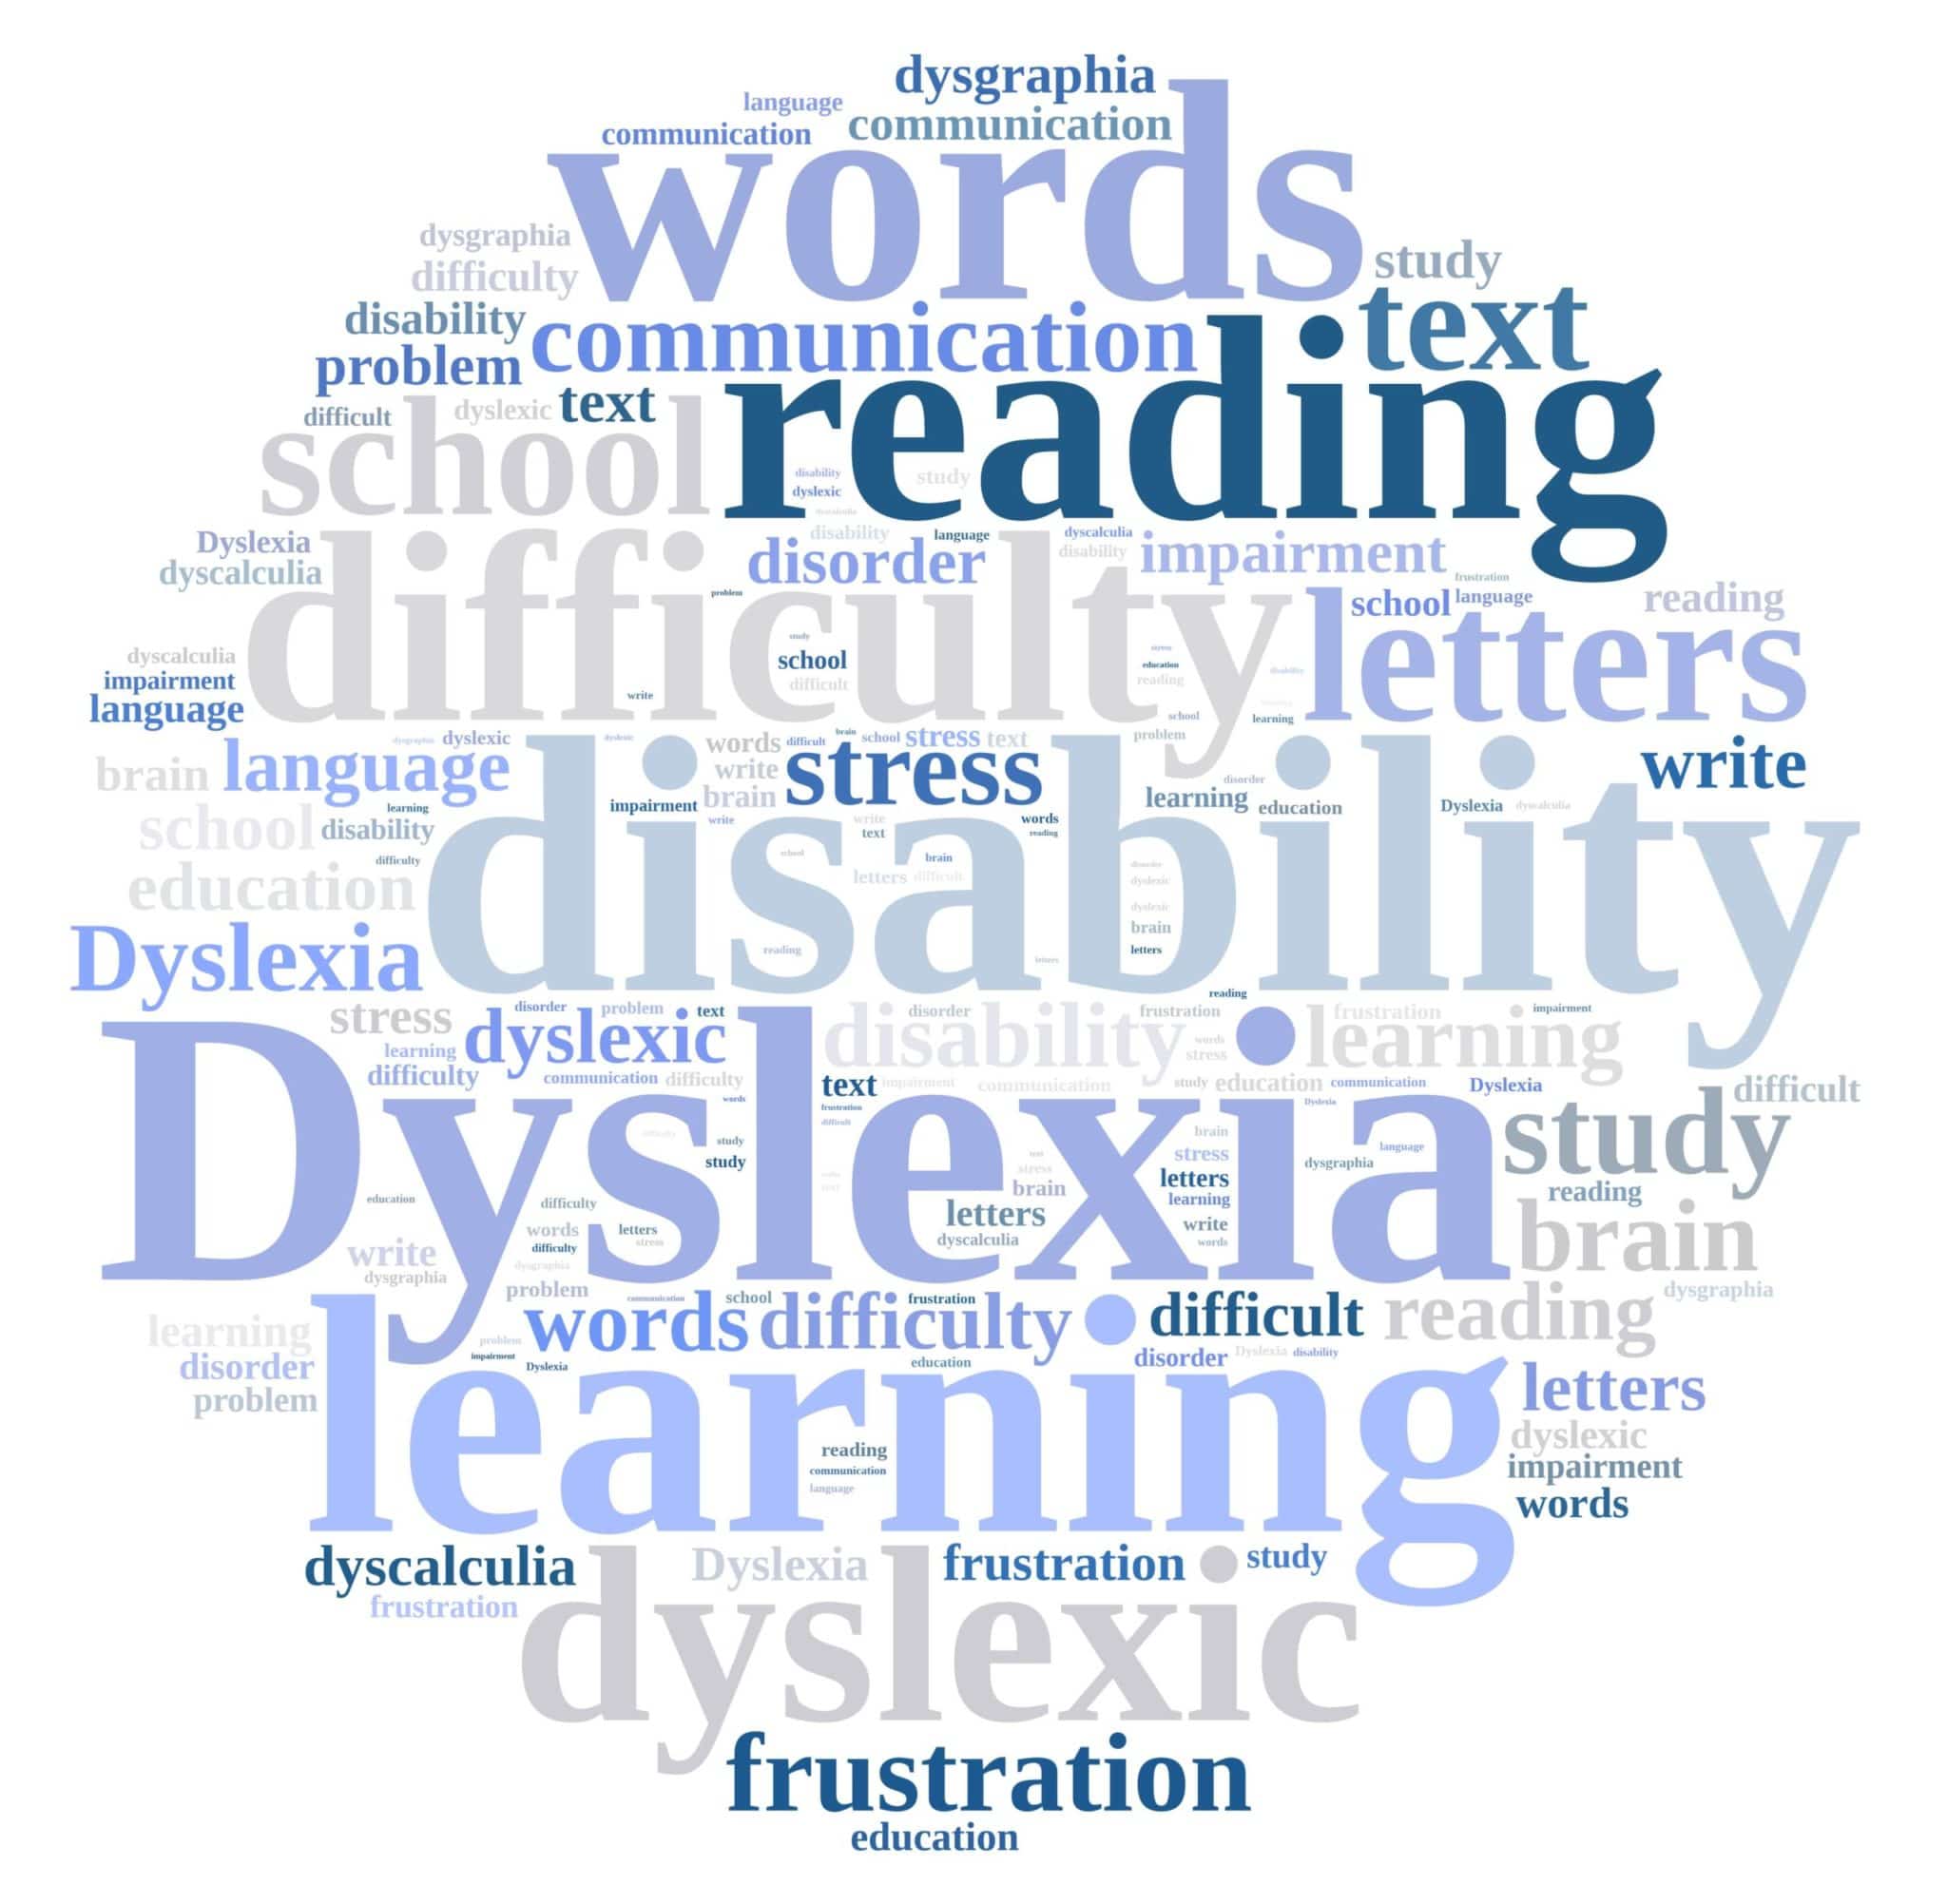 Super Tutor - Word cloud about dyslexia